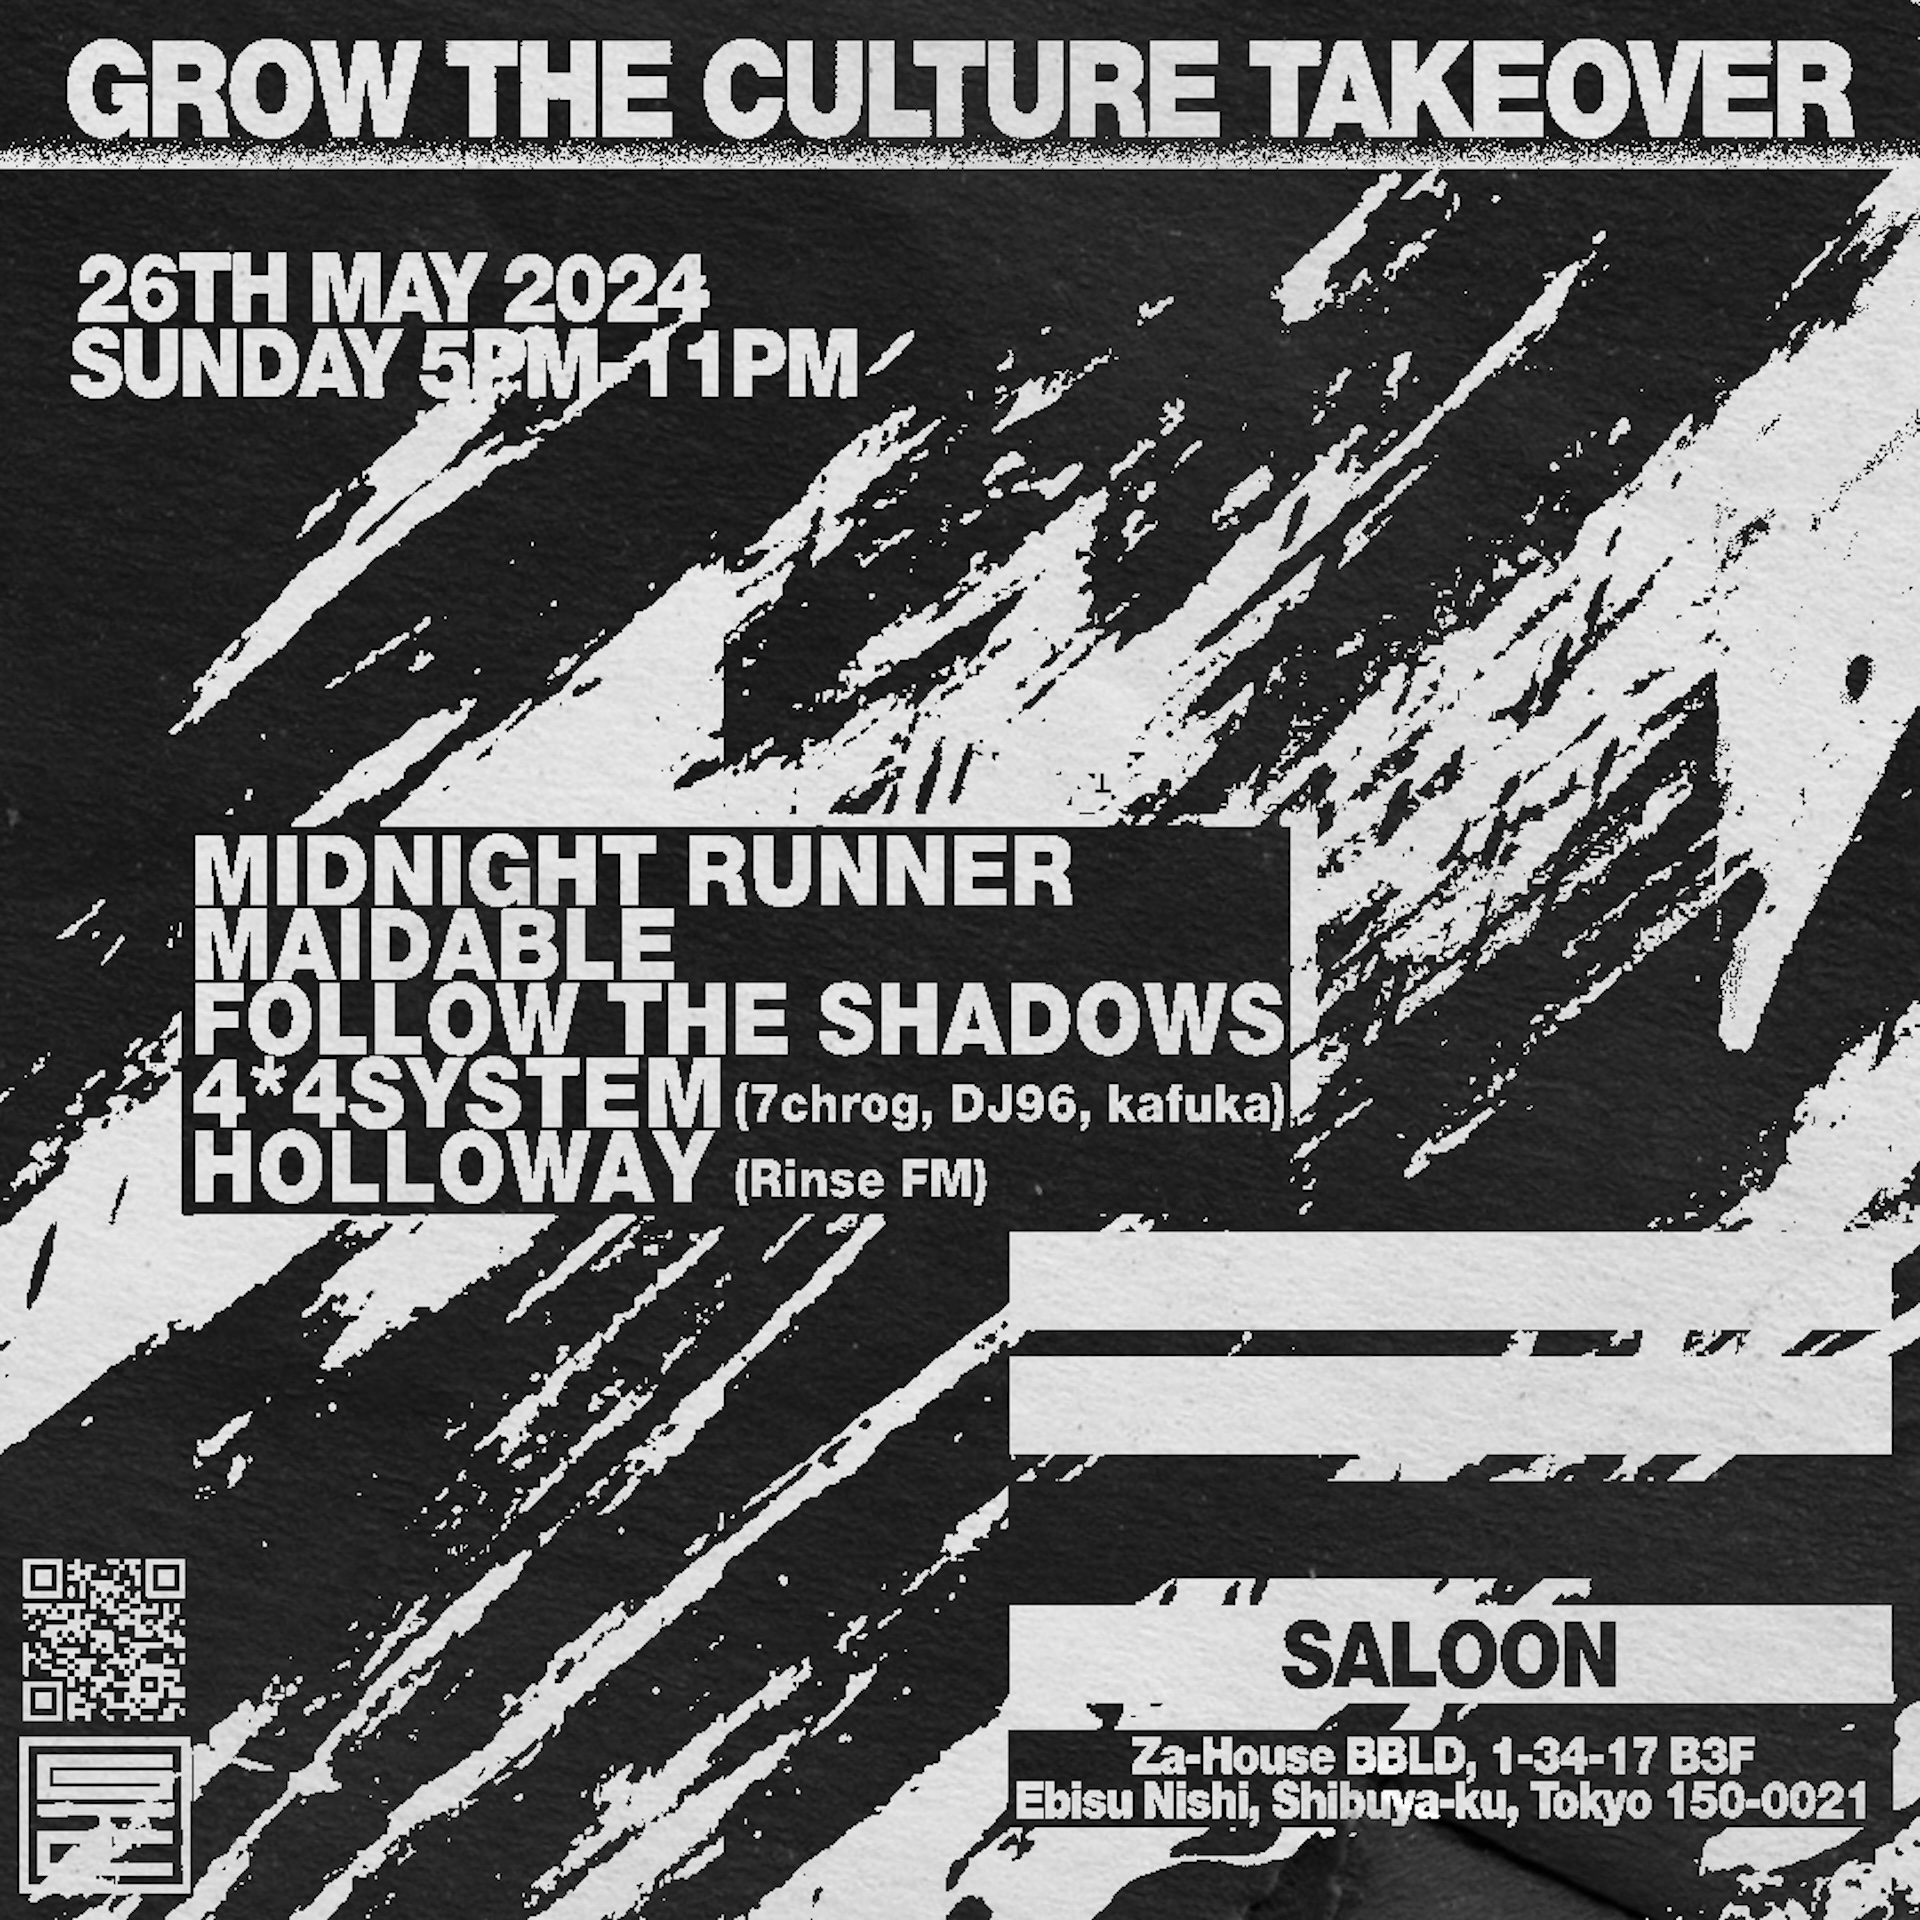 【INTERVIEW＆REPORT】20時間ぶっ通しの重音レイヴパーティ＜GROW THE CULTURE OPEN AIR 2024＞ column240524-growtheculture2